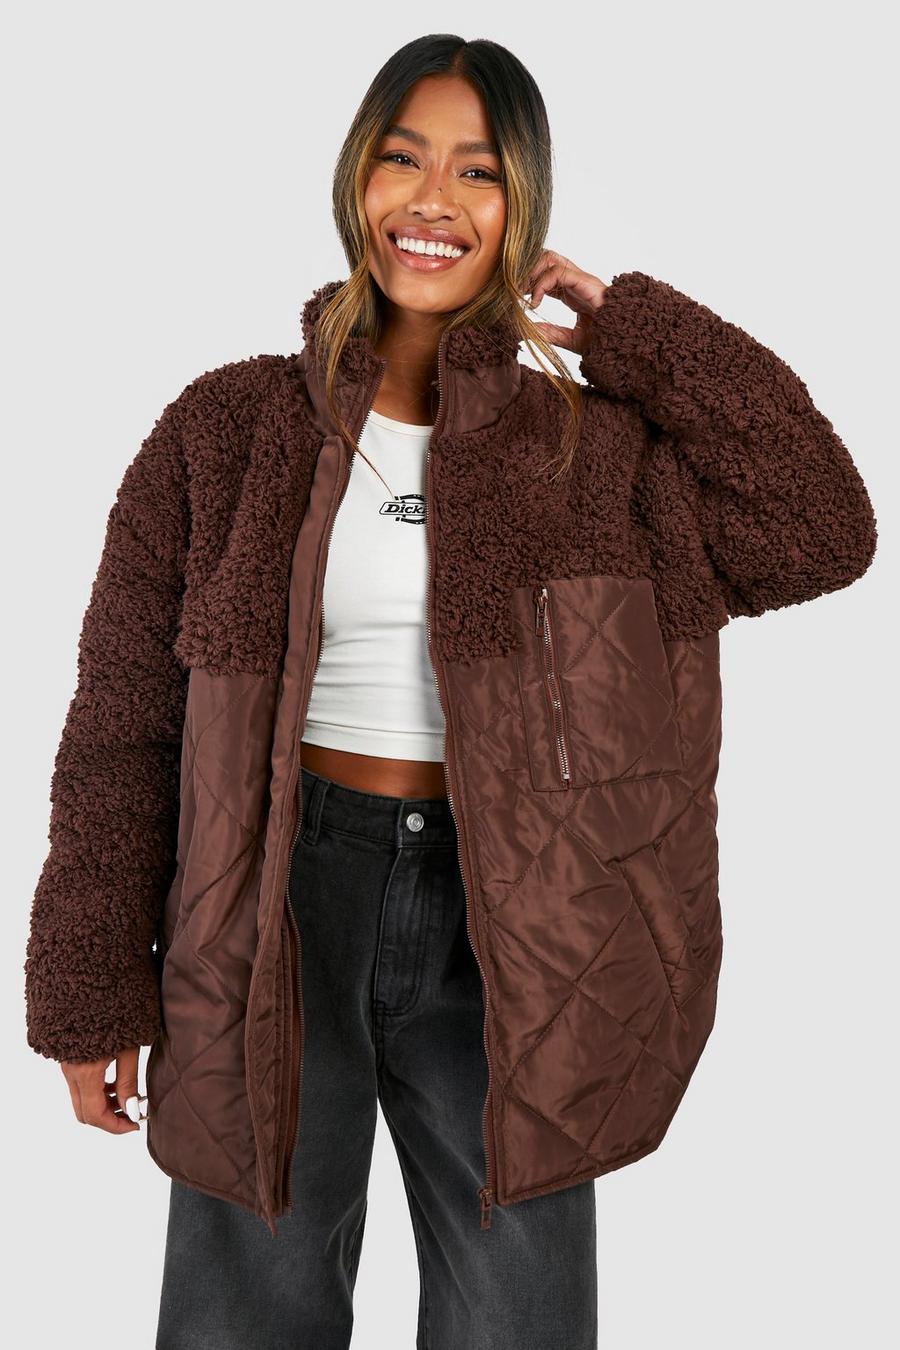 Chocolate marron Borg Trim Quilted Jacket